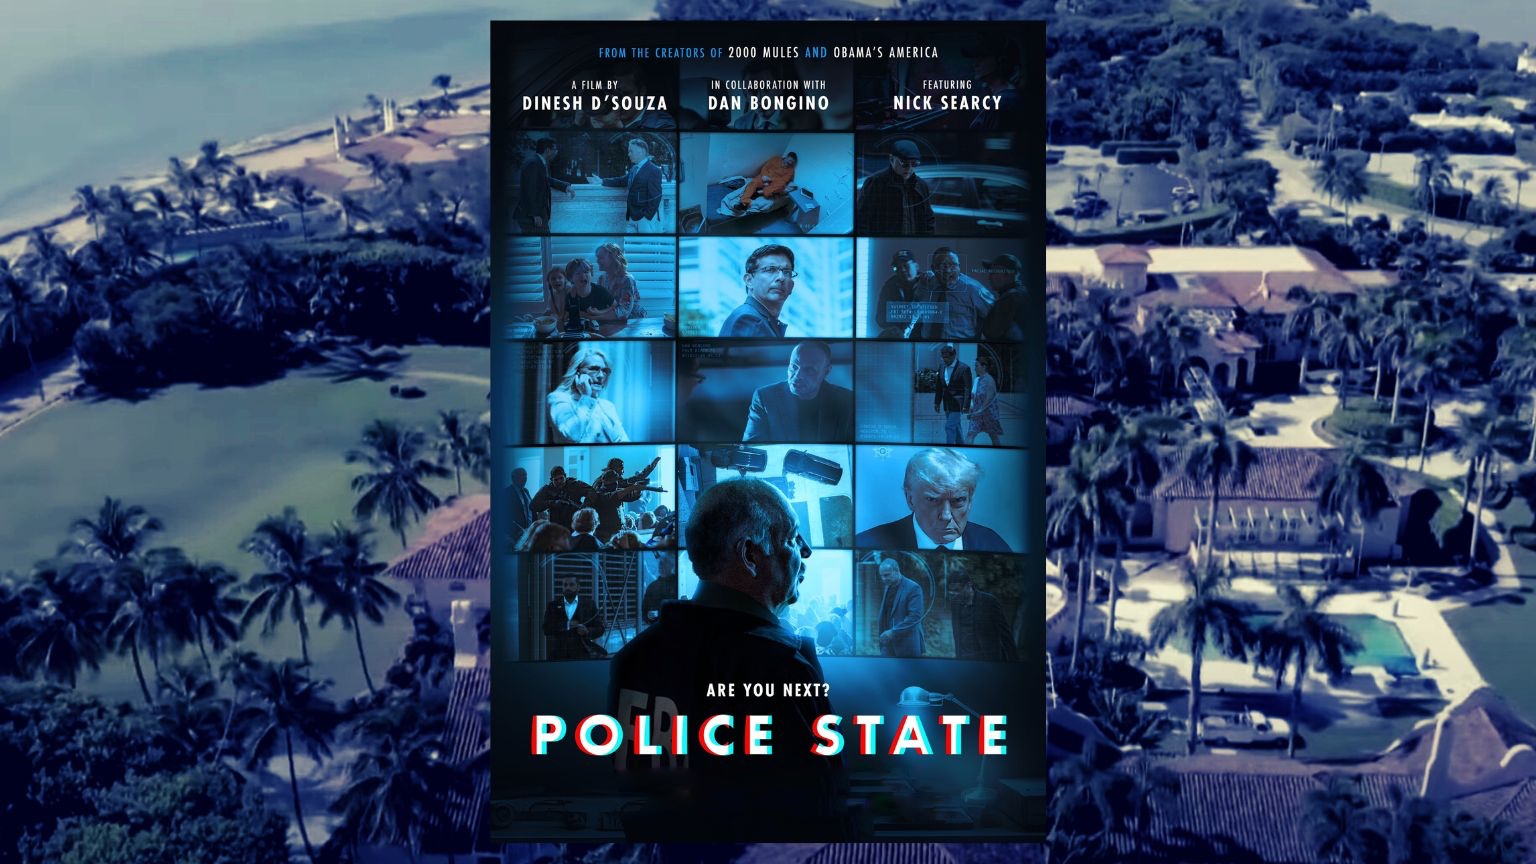 President Trump To Host “Police State” Documentary Red Carpet at Mara